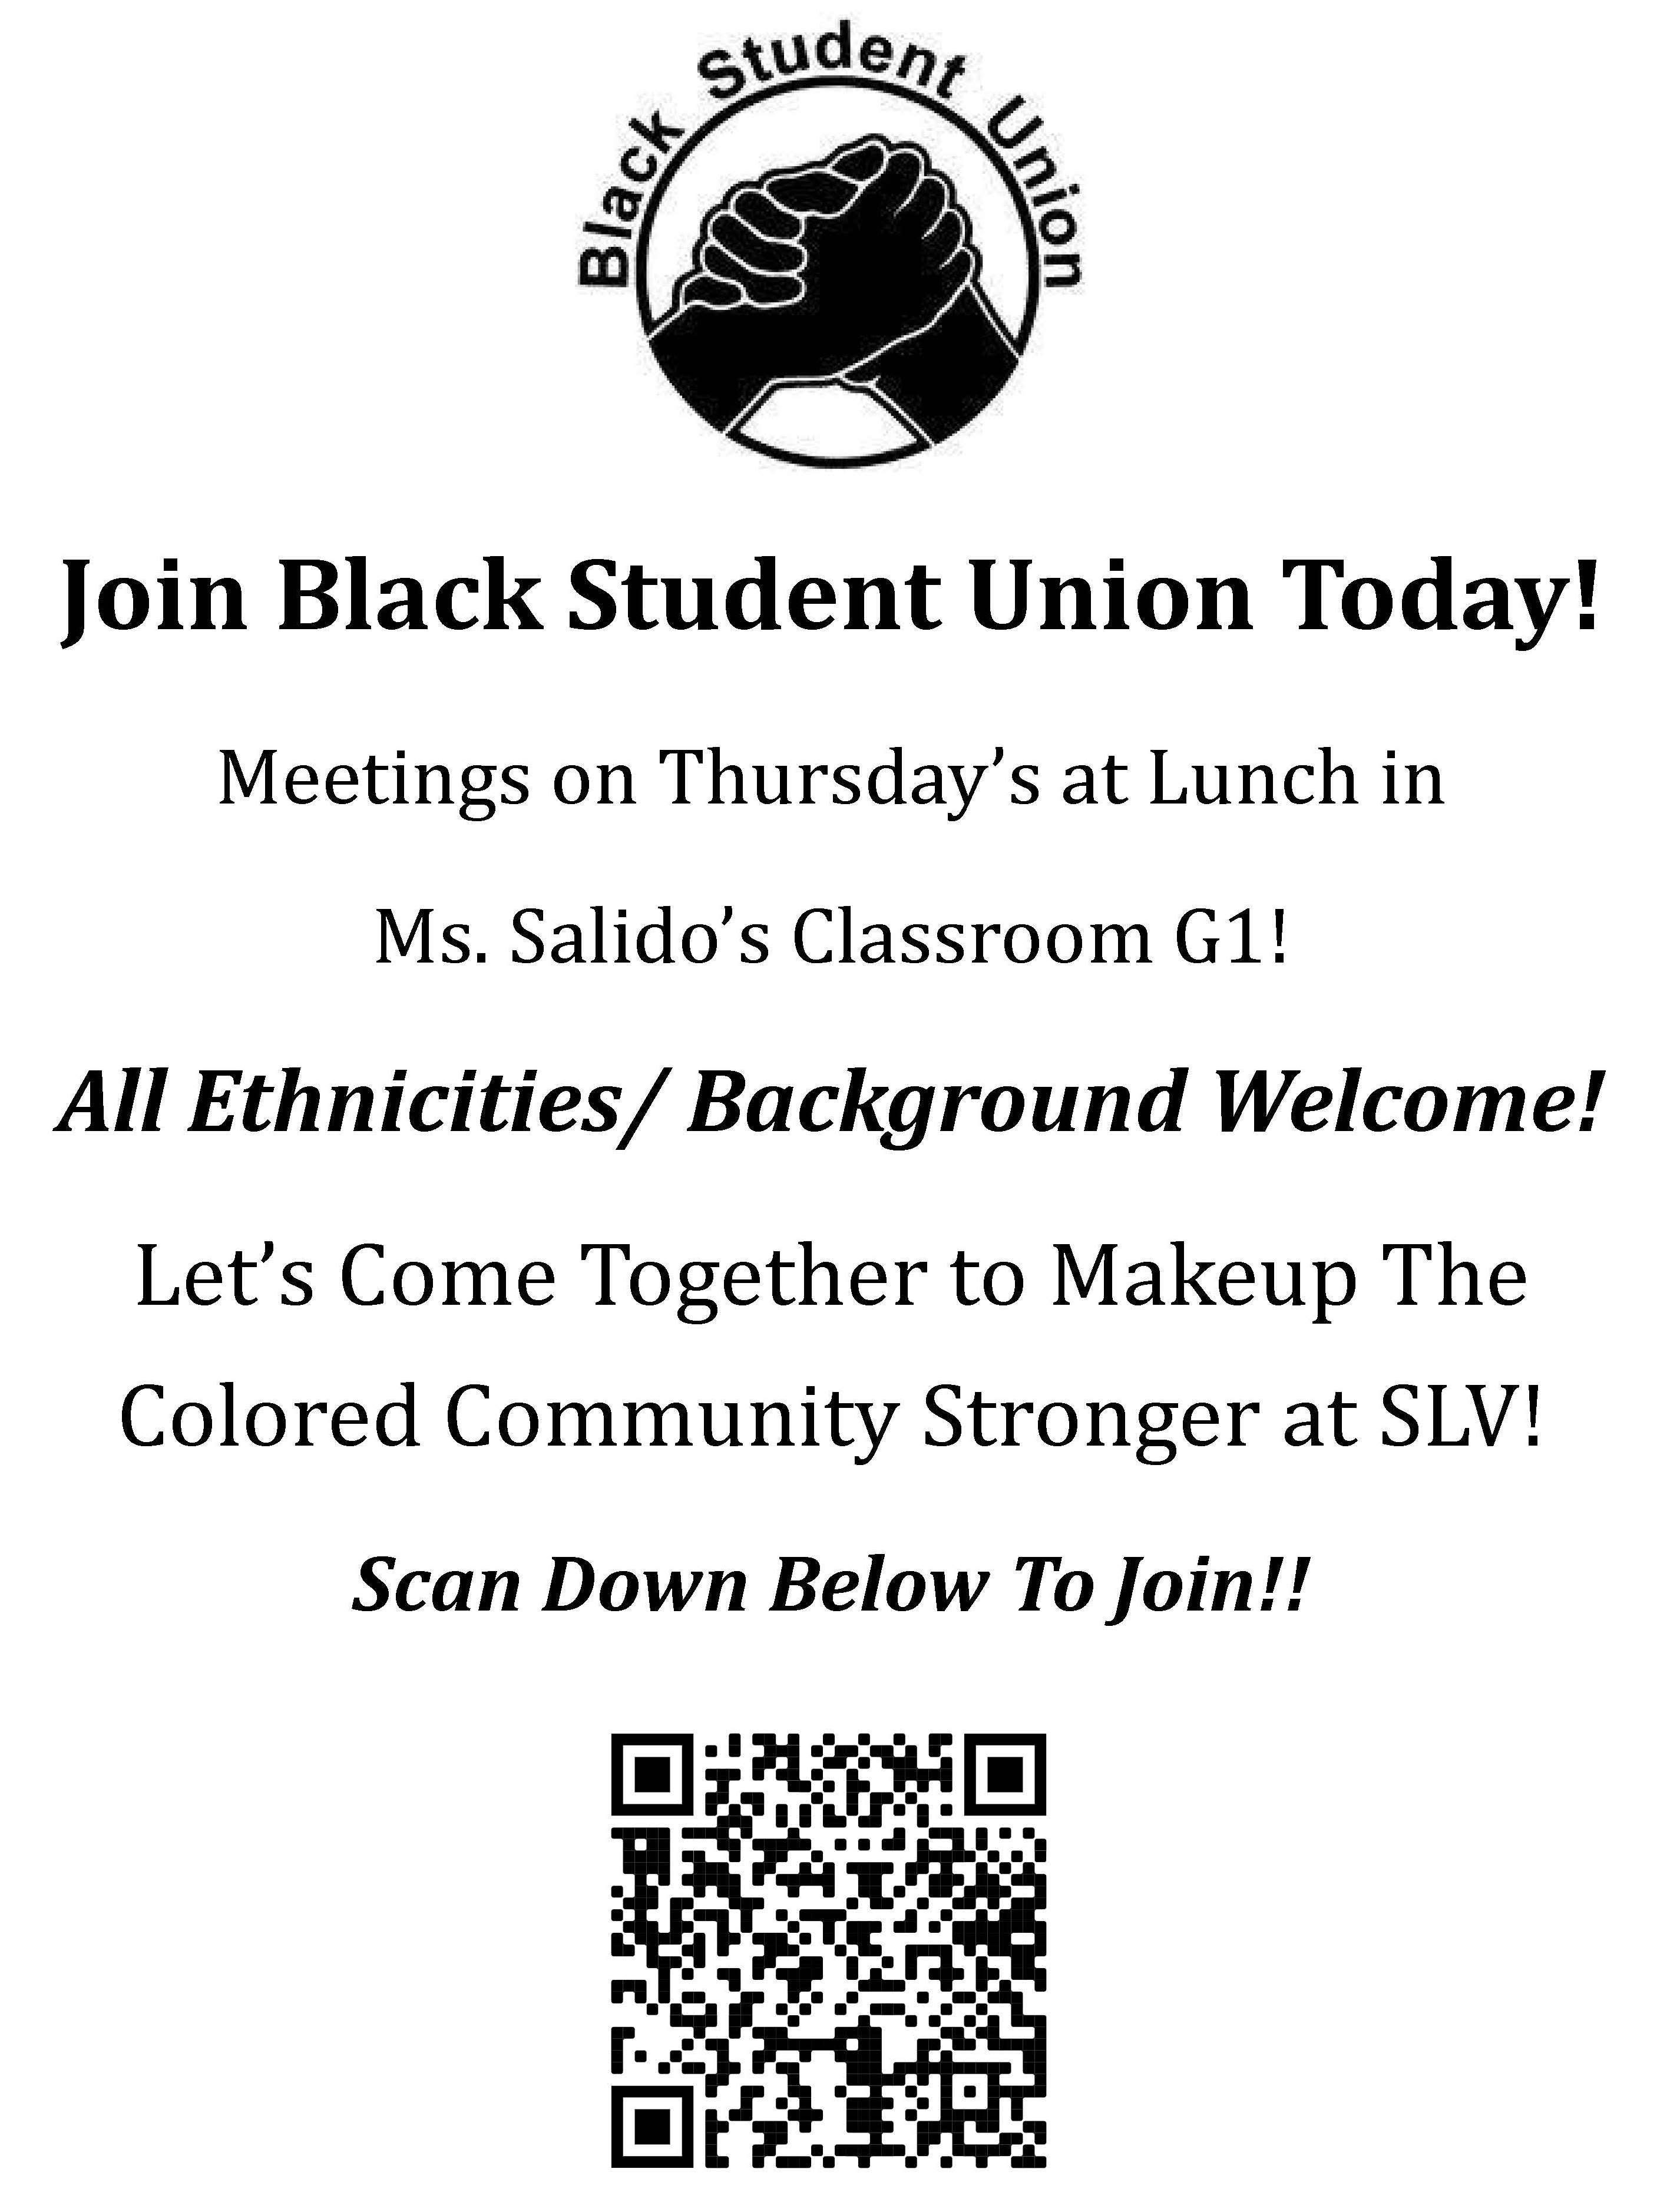 join black student union today; call 831-335-4425 x200 for details